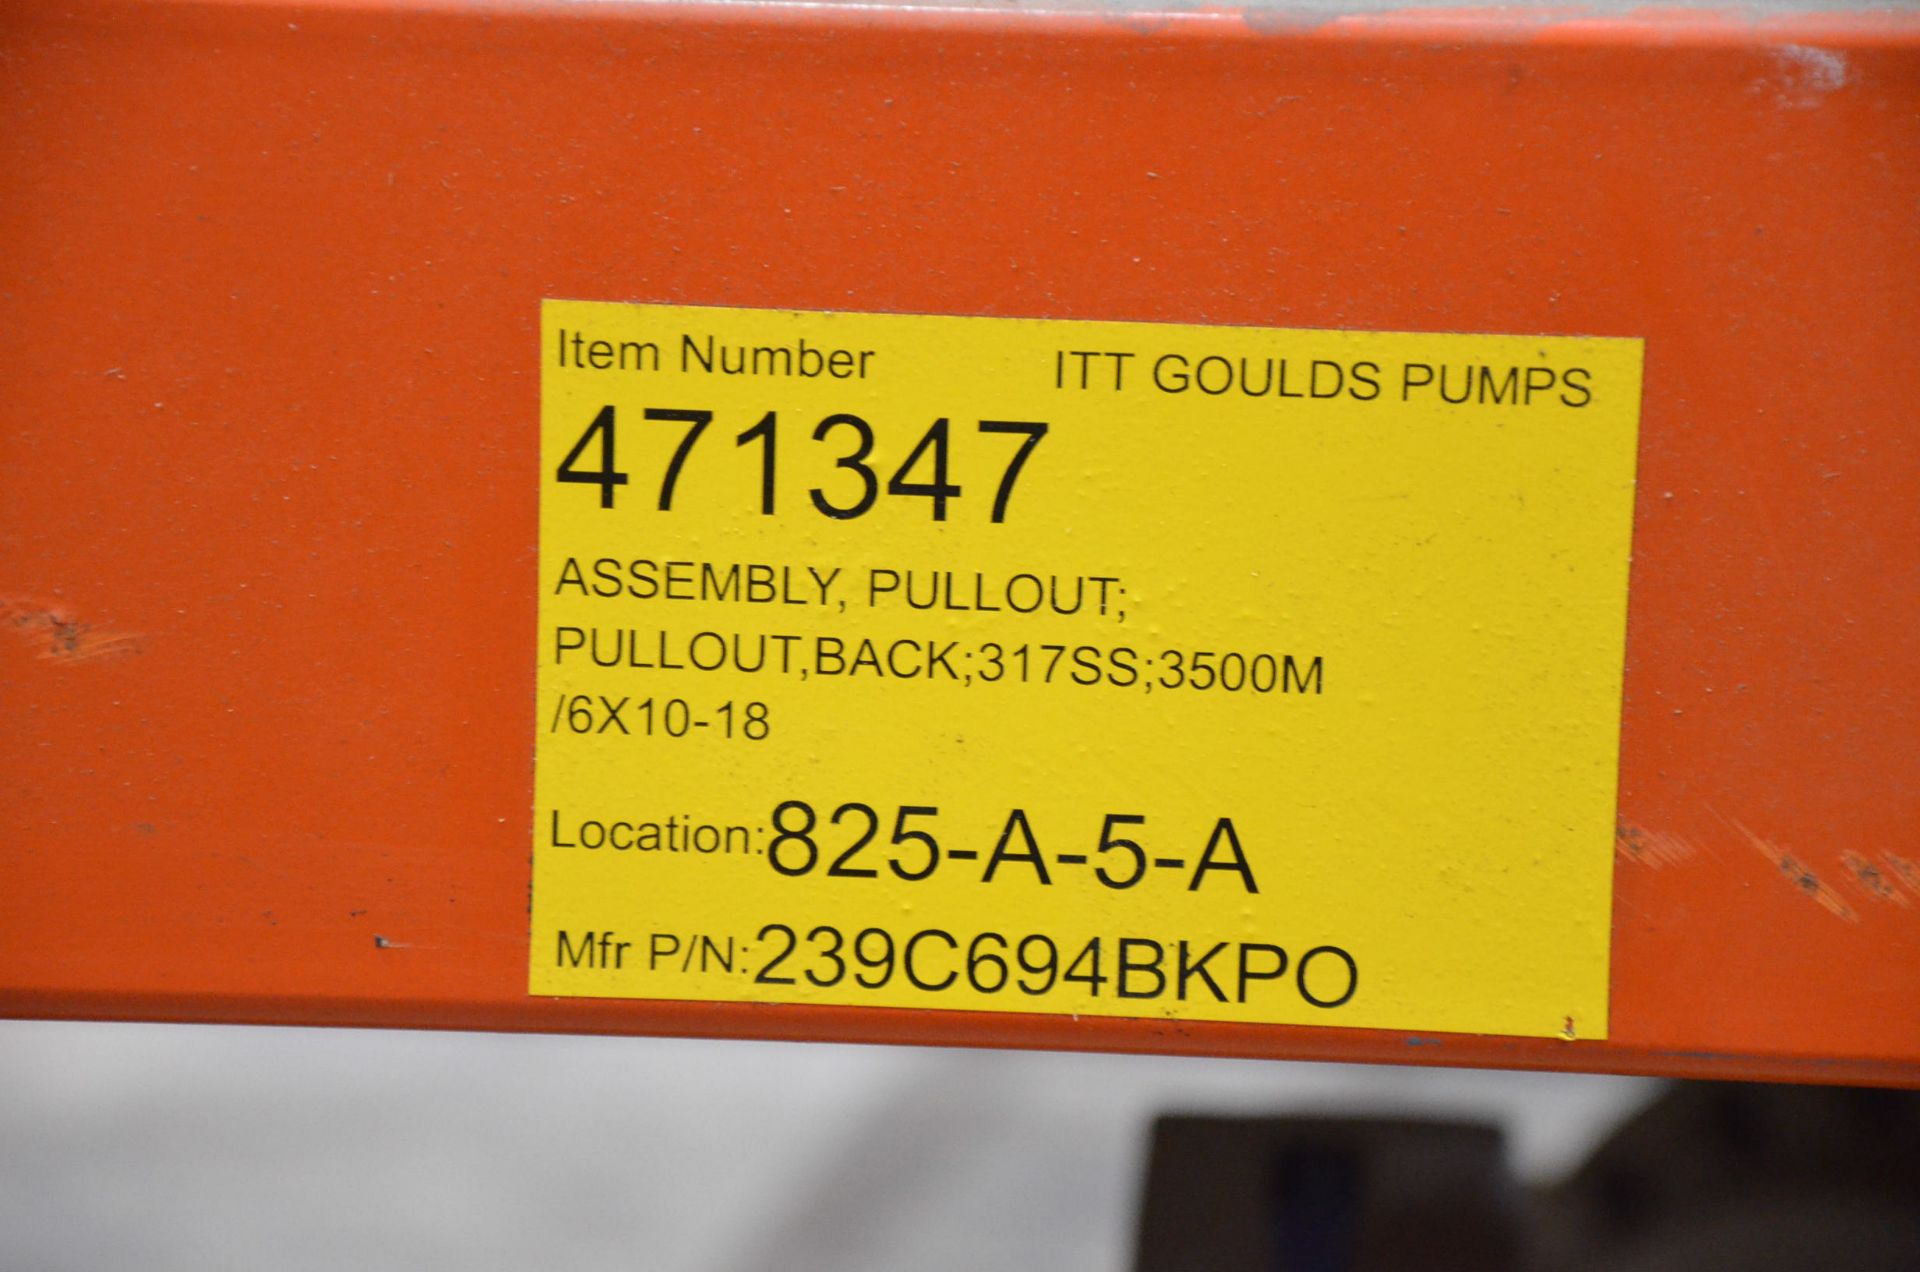 GOULDS ITT 3500M/6X10-18 PUMP ROTARY ASSEMBLY SIZE 6X10-18 - Image 2 of 2